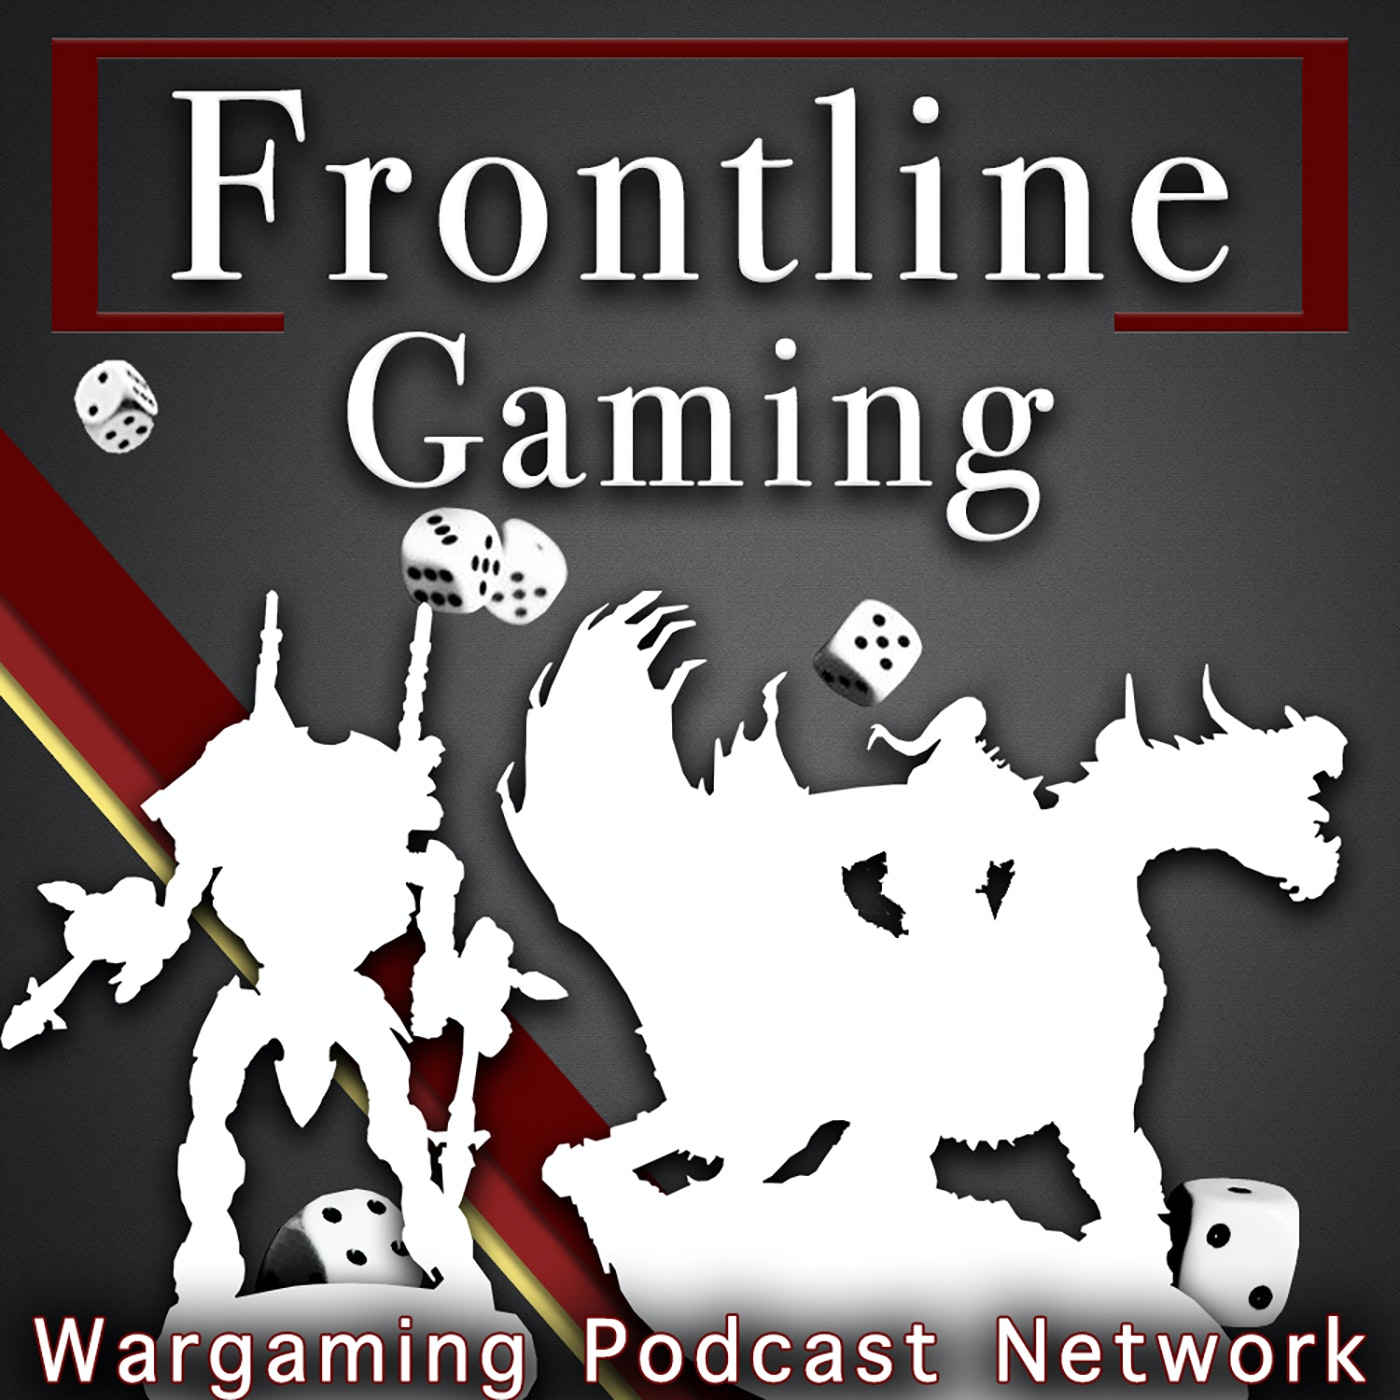 Signals From the Frontline #462 Special Interview with BattleHaven